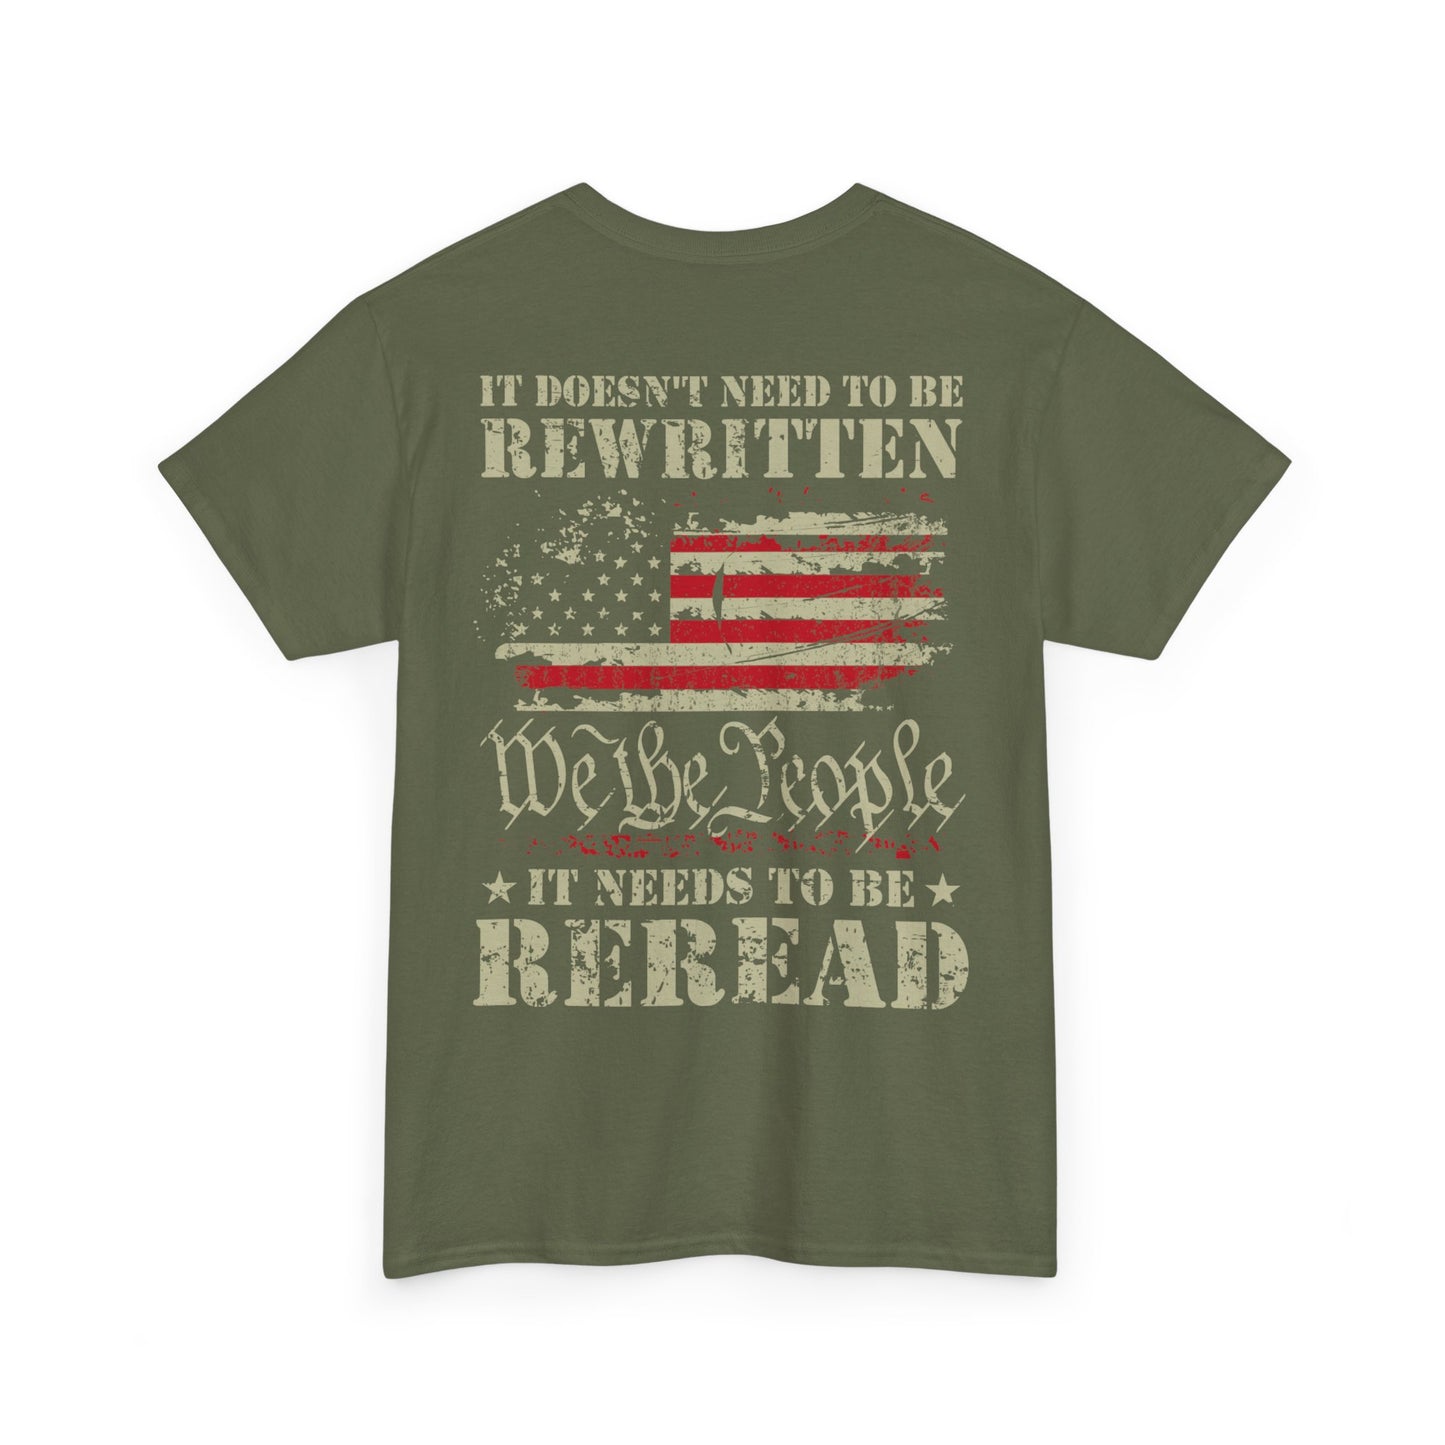 Premium Unisex "It Doesn't Need To Be Rewritten, It Needs To Be Reread" Tee - Second Amendment USA T-Shirt